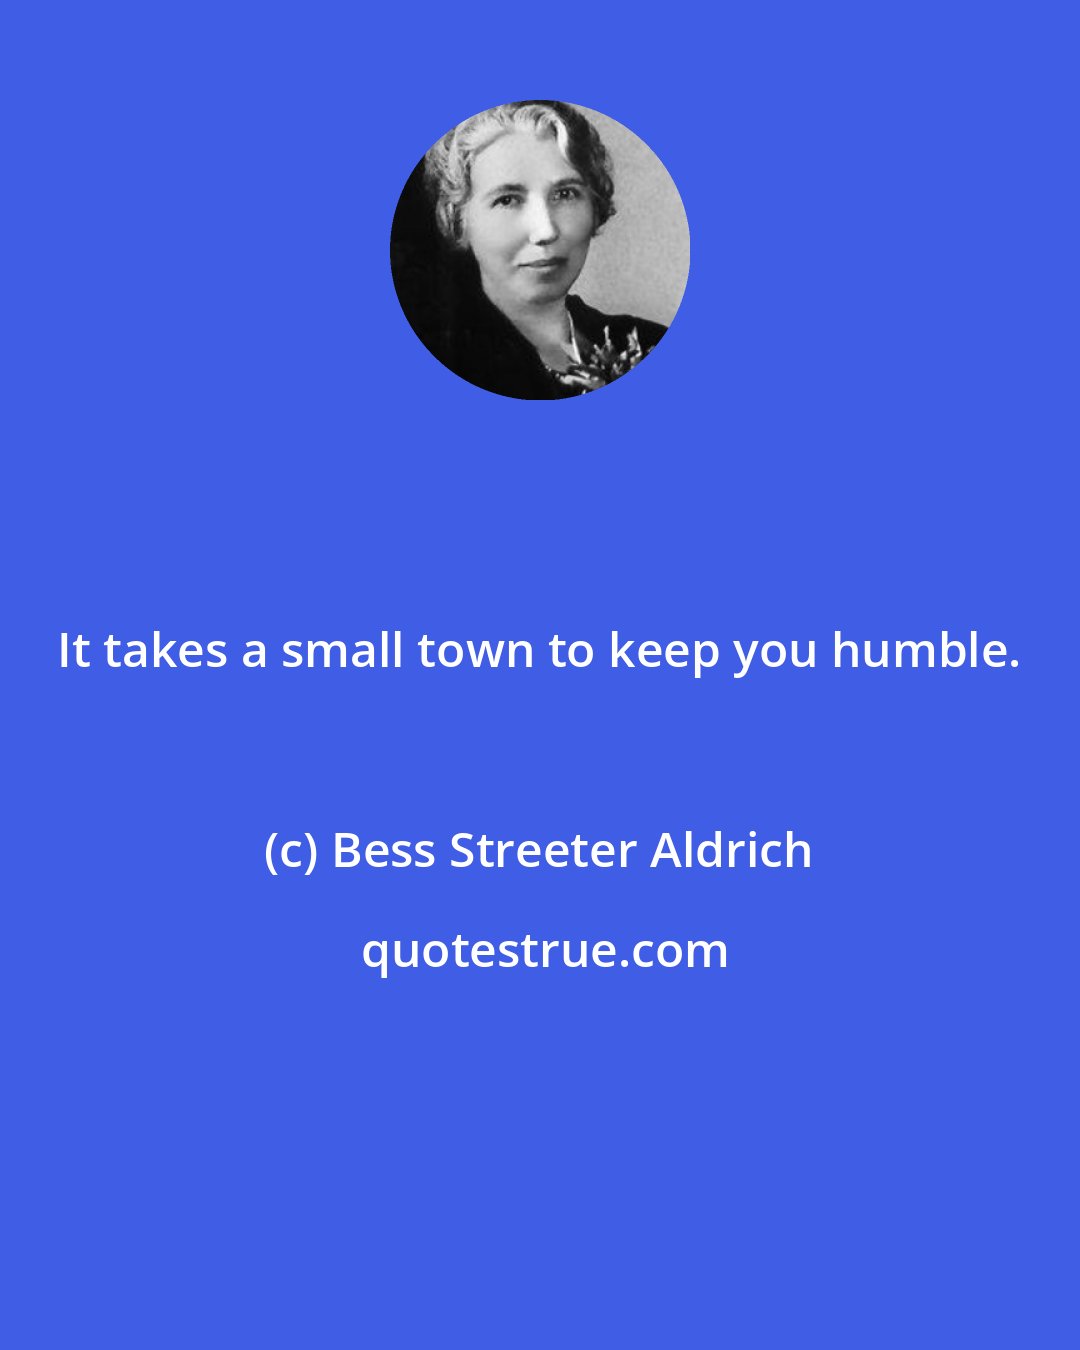 Bess Streeter Aldrich: It takes a small town to keep you humble.